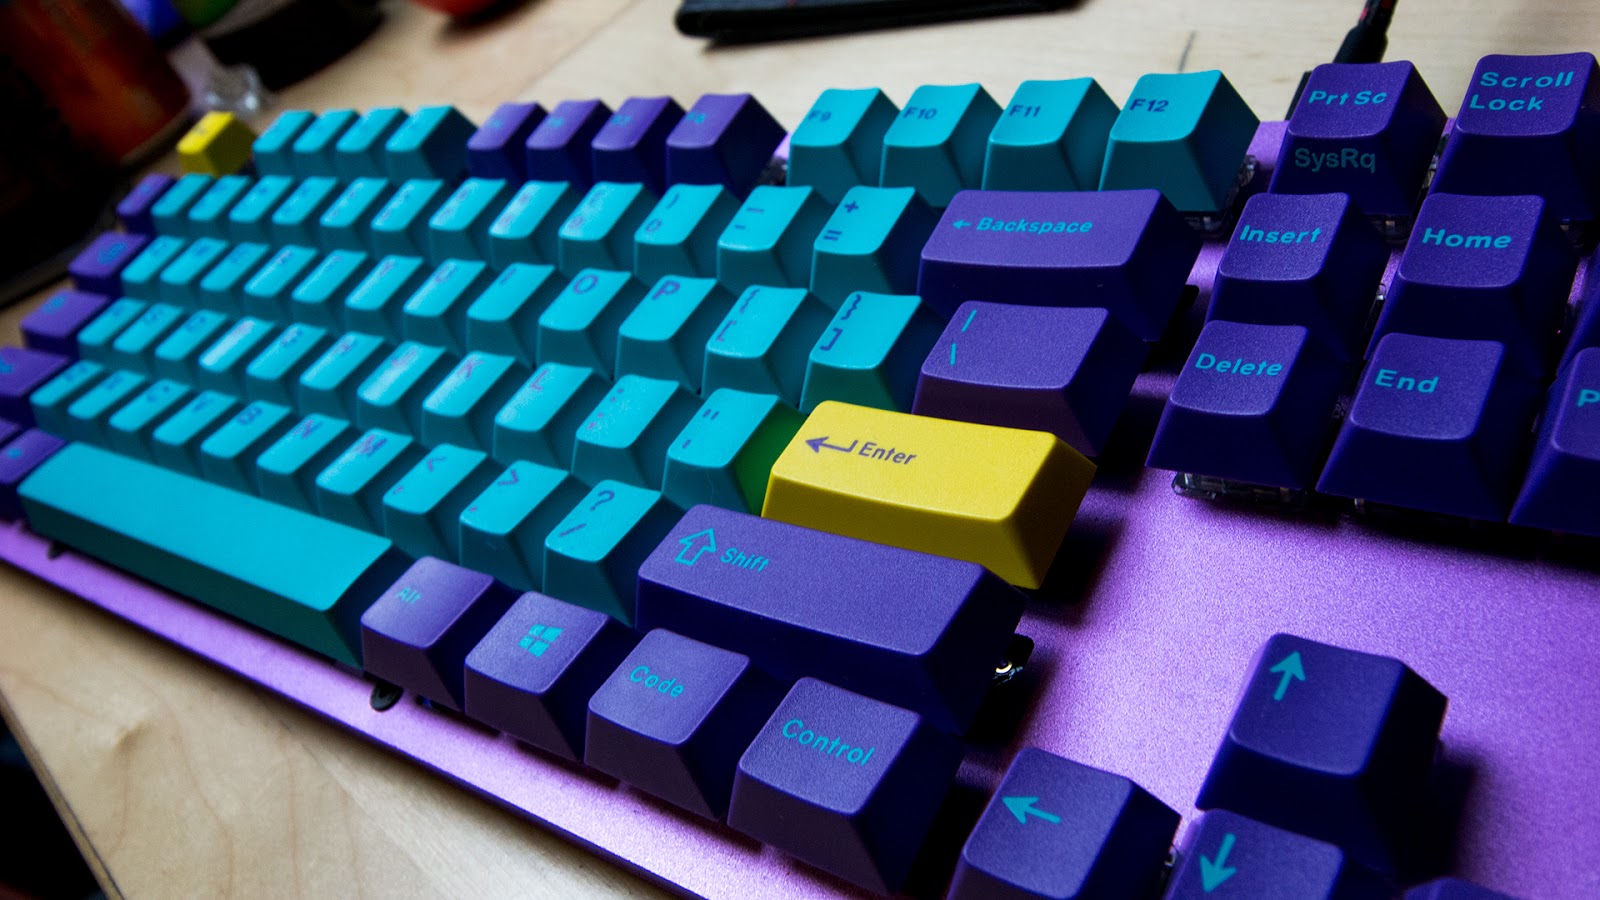 Swapping Keycaps Is The Key To Having A Pretty Keyboard